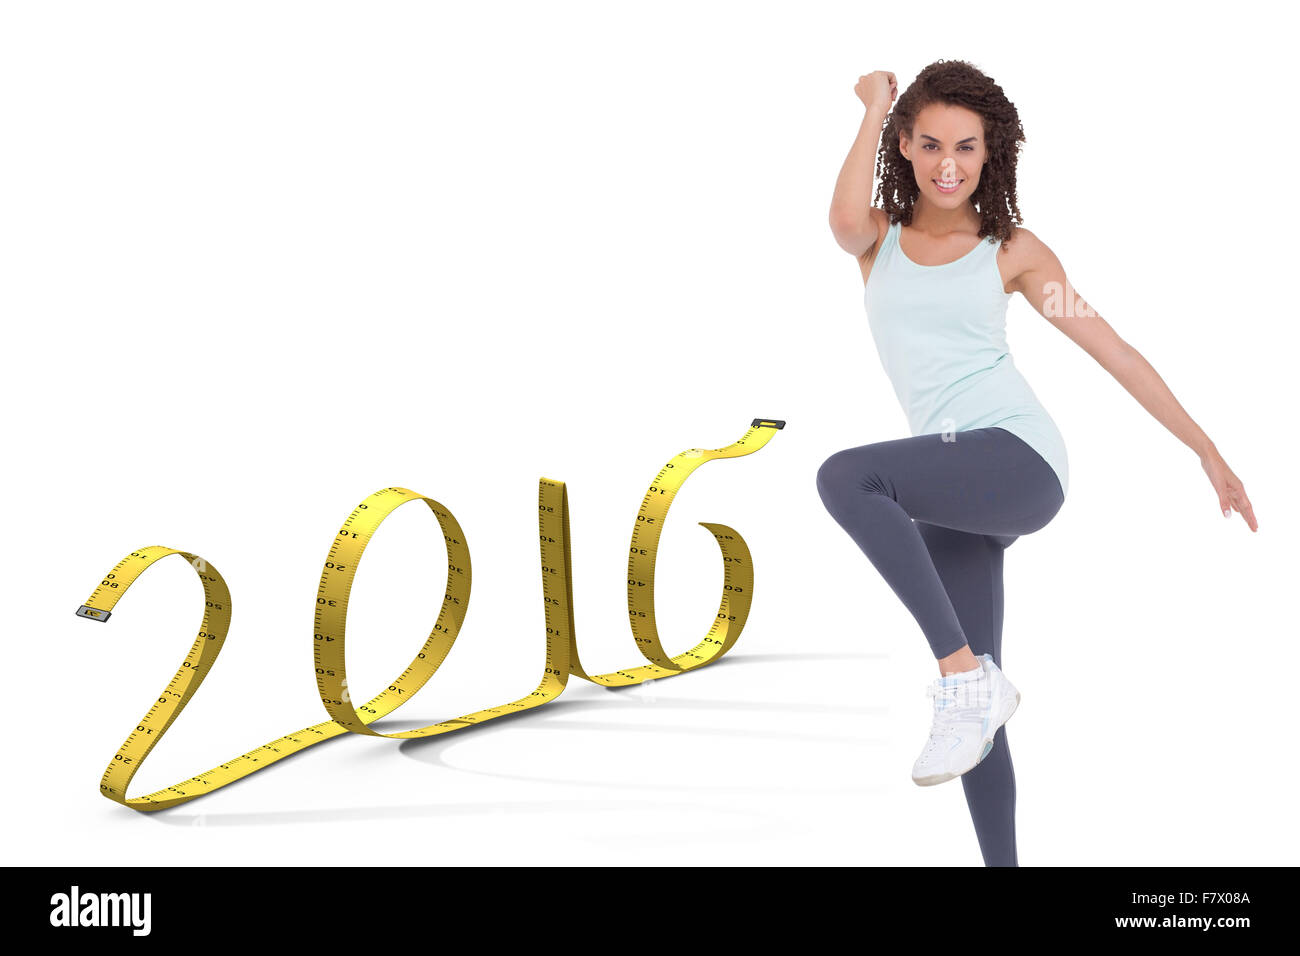 Composite image of fit woman doing aerobic exercise Stock Photo